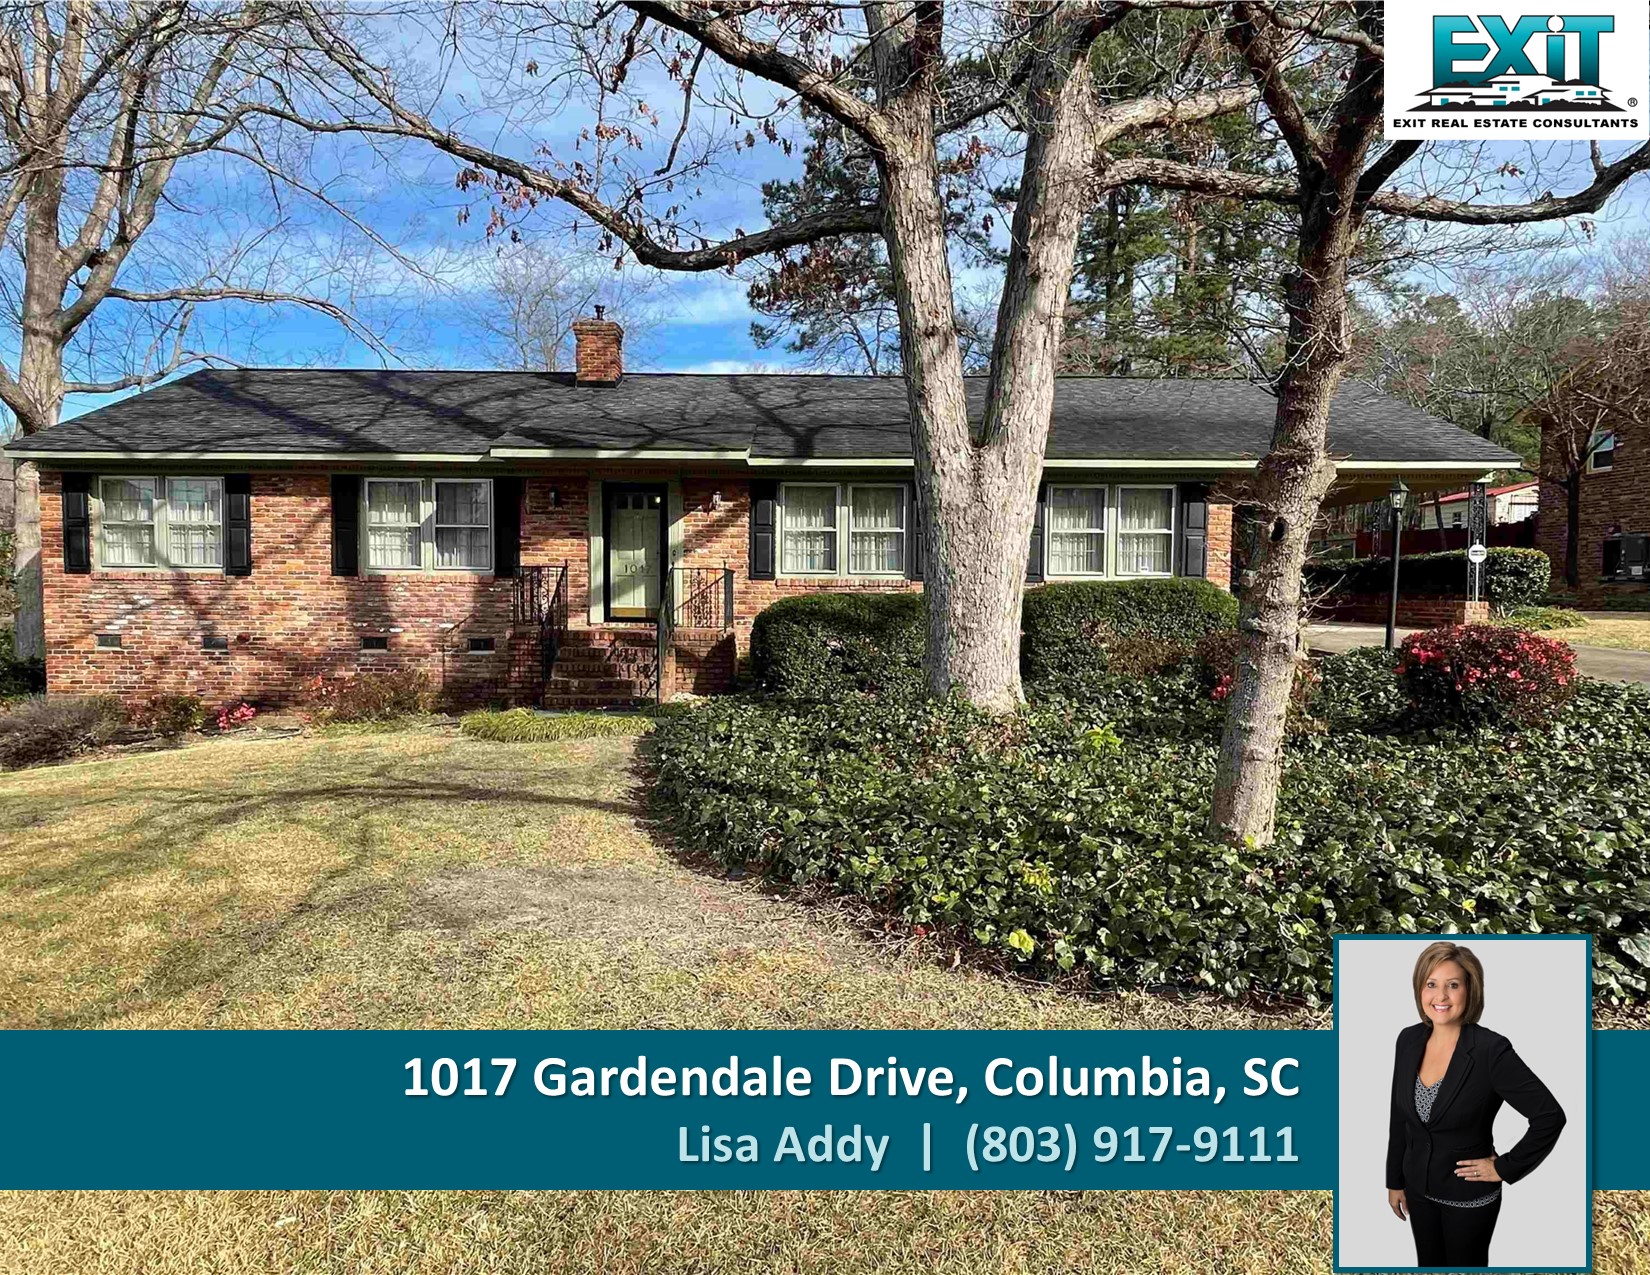 Just listed in Gardendale